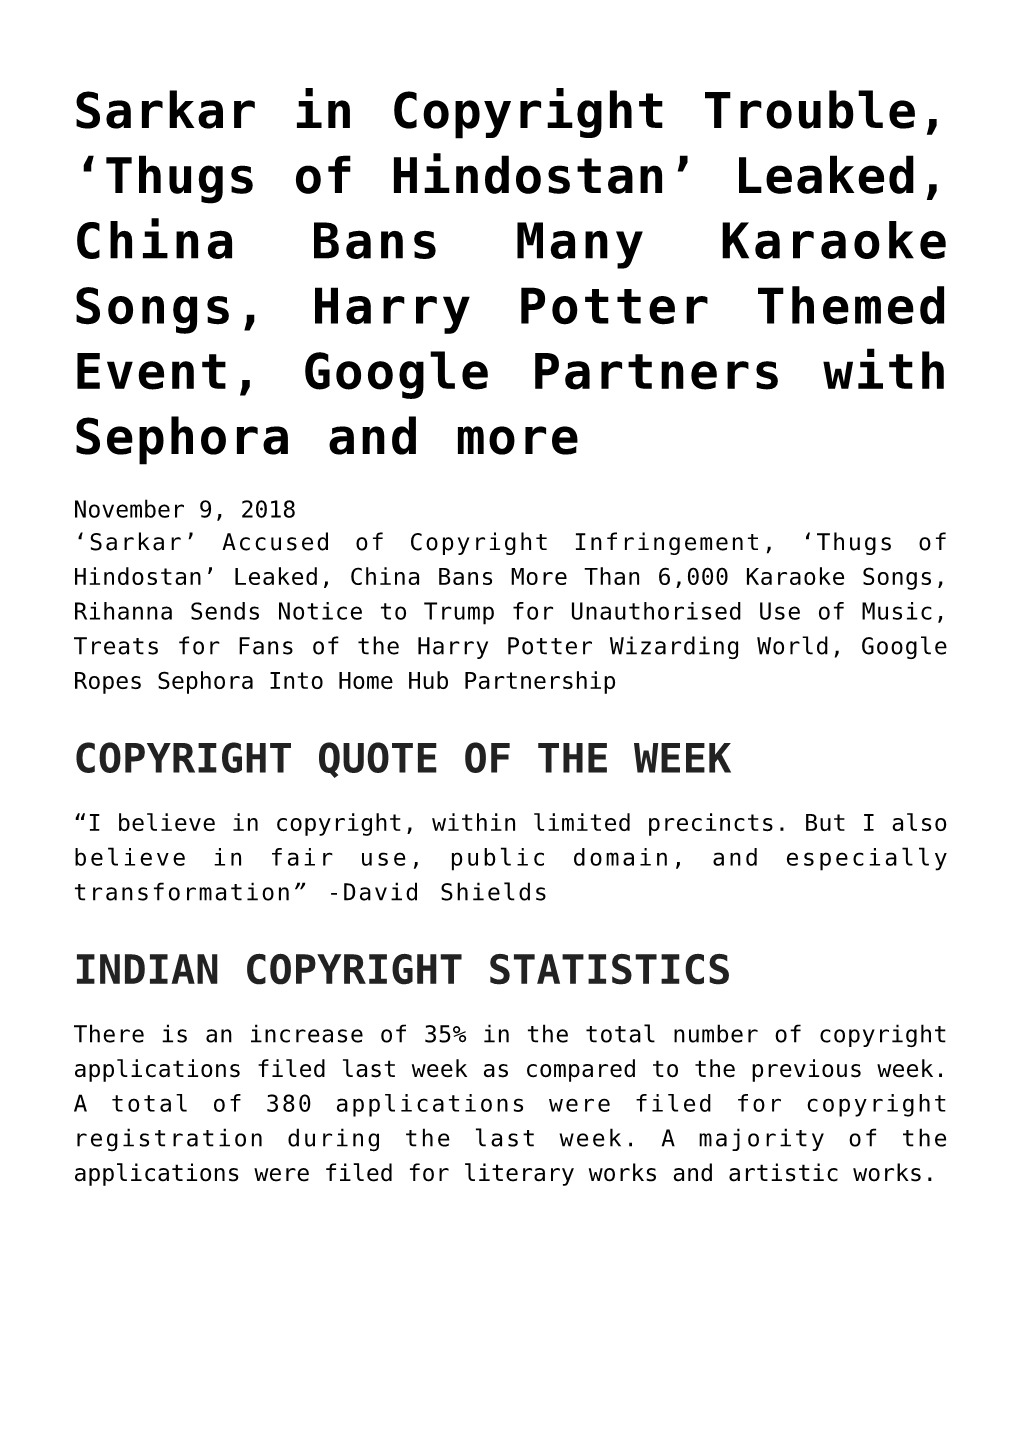 Leaked, China Bans Many Karaoke Songs, Harry Potter Themed Event, Google Partners with Sephora and More